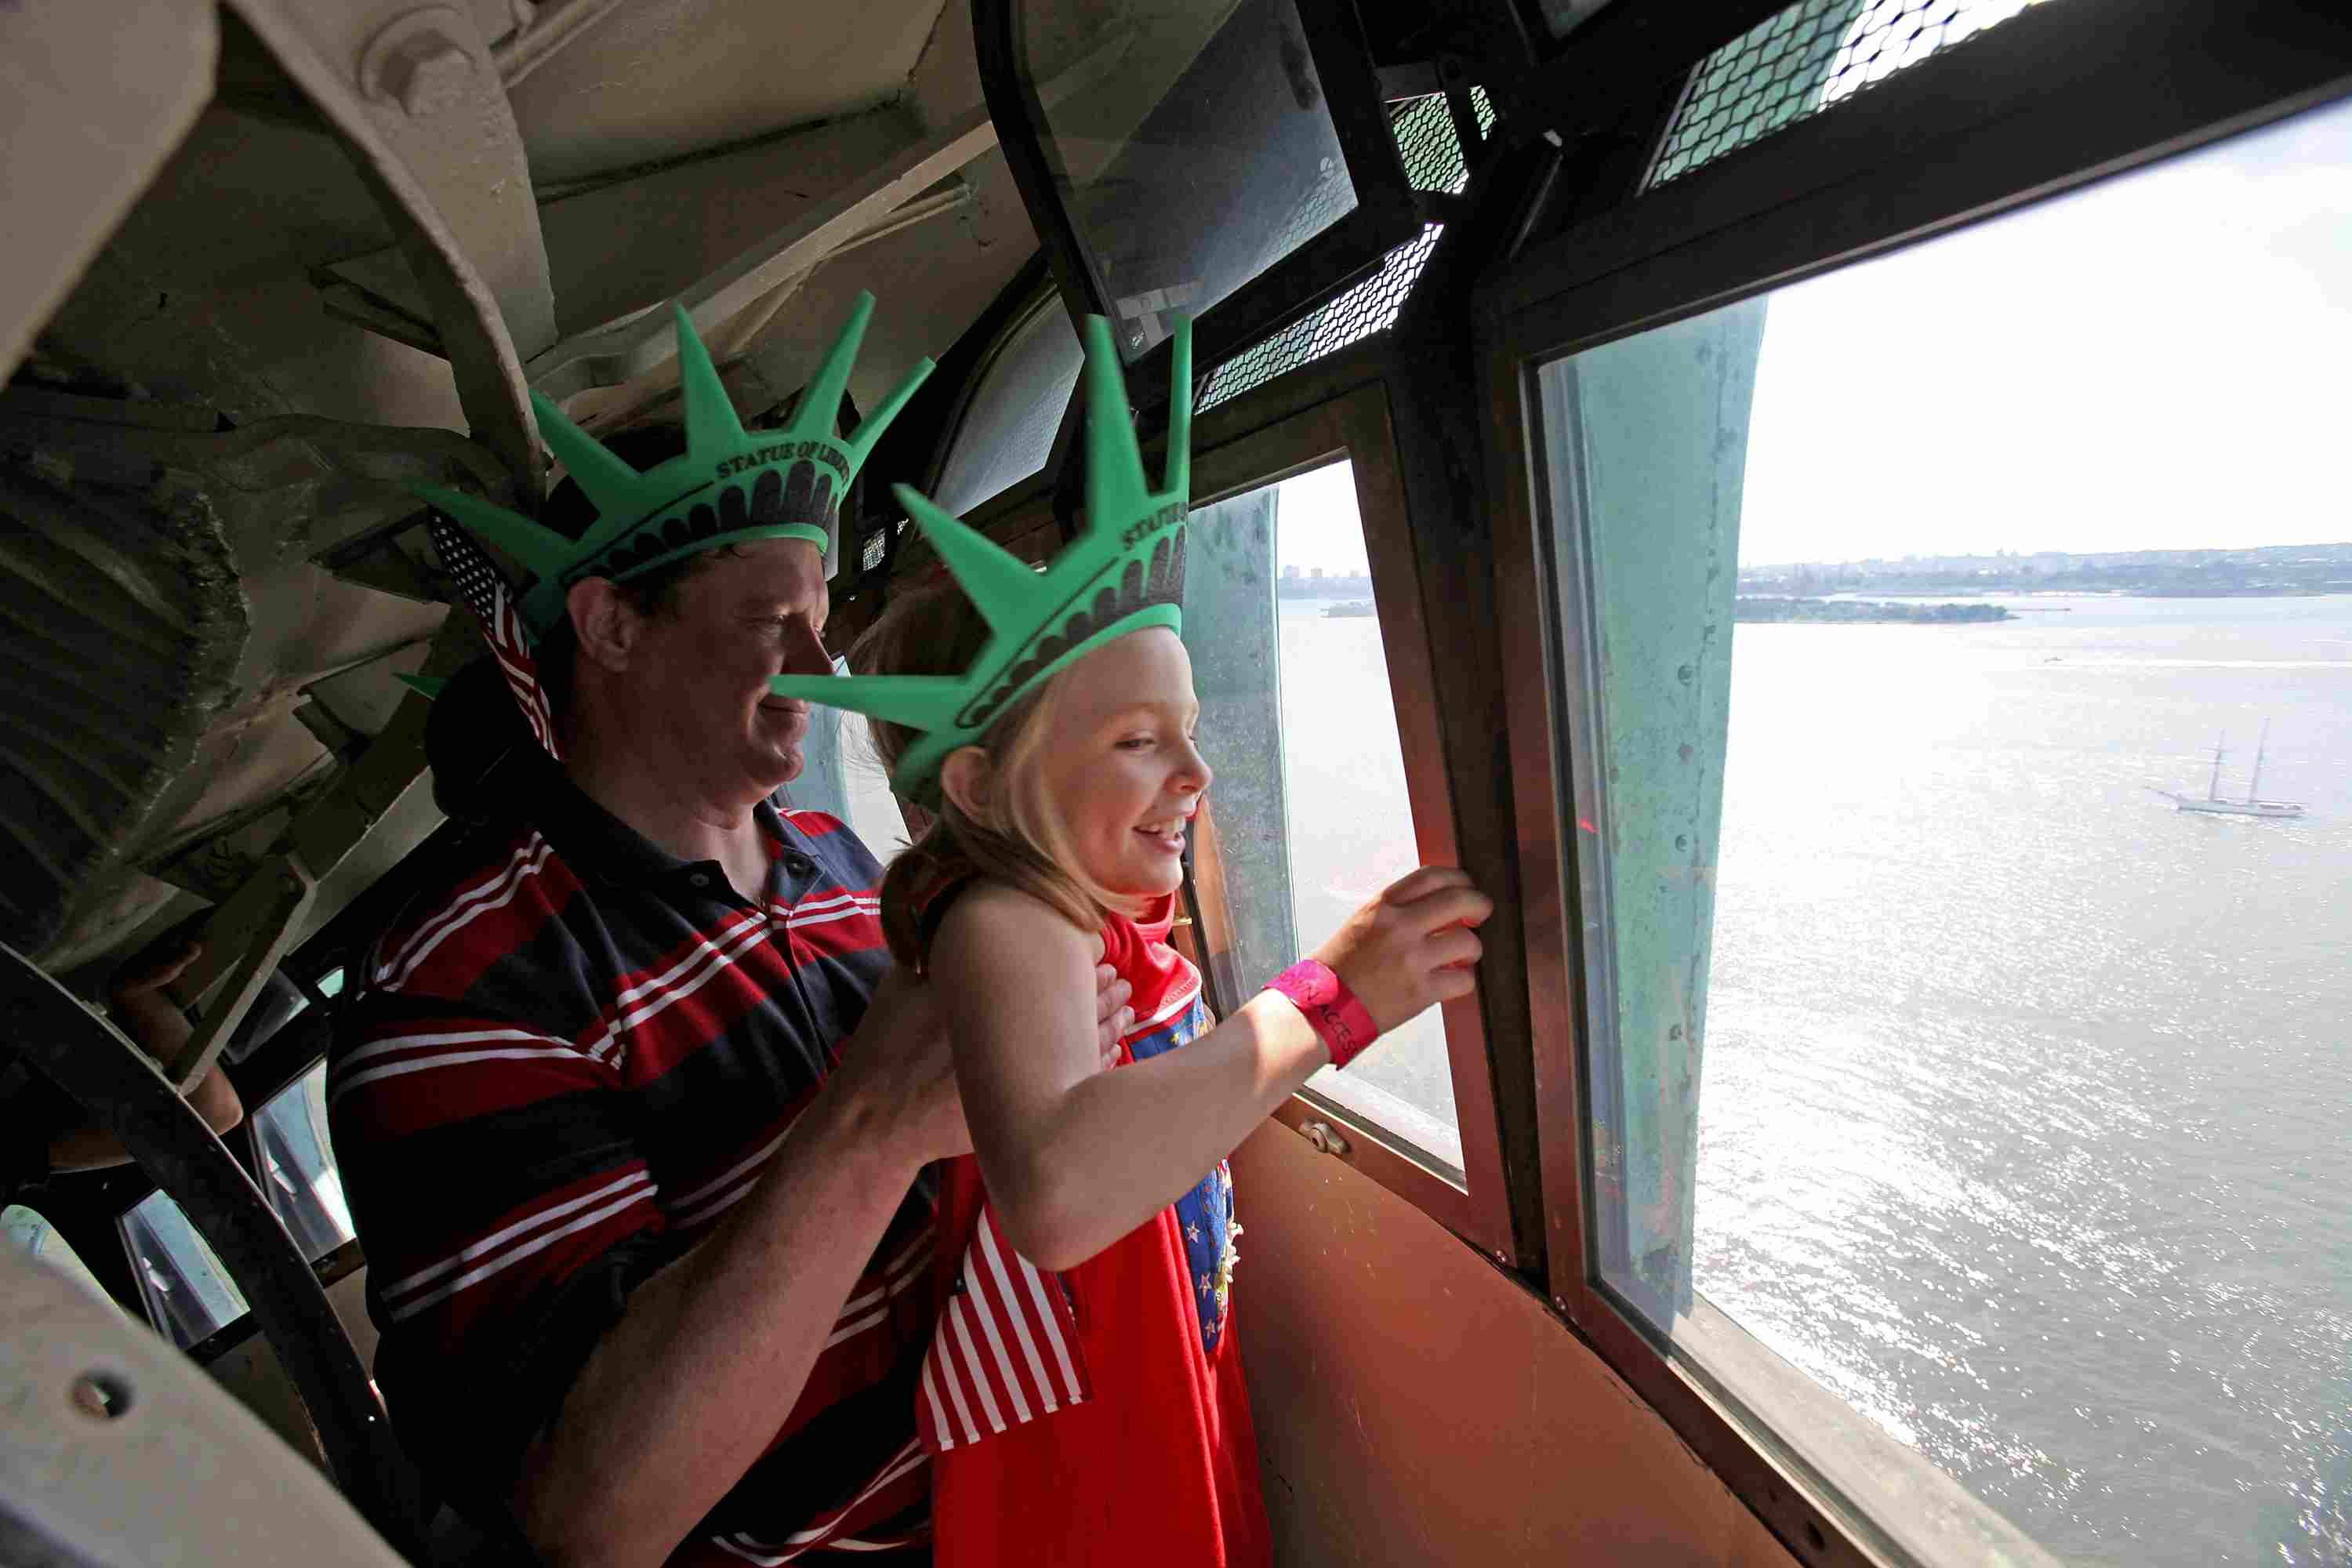 Tour De Lit Liberty Belle 10 Tips for Visiting the Statue Of Liberty